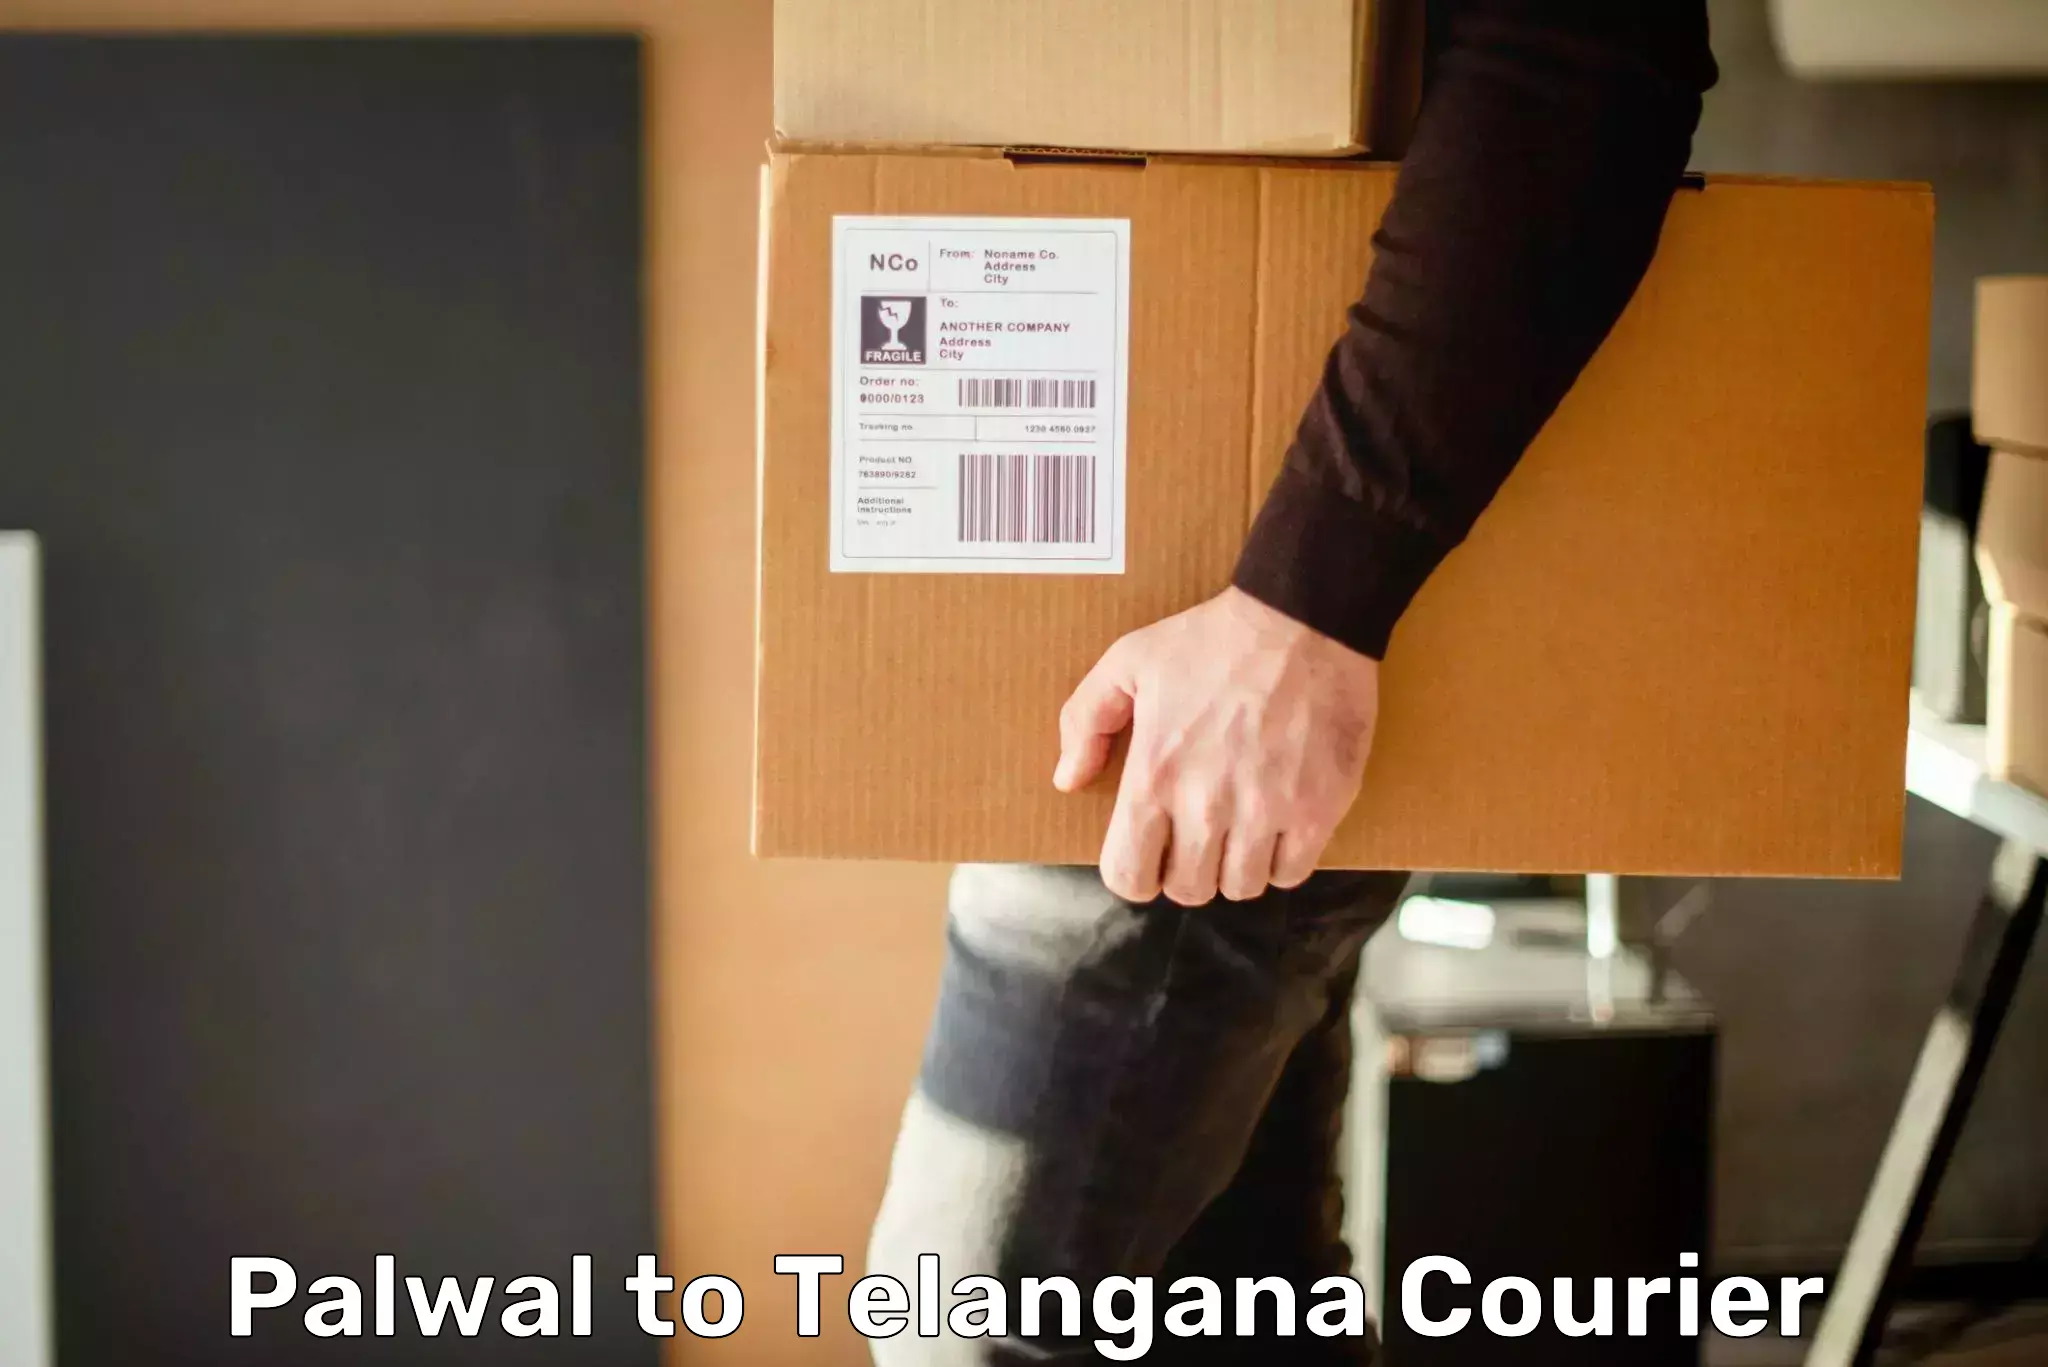 Lightweight courier Palwal to Hyderabad